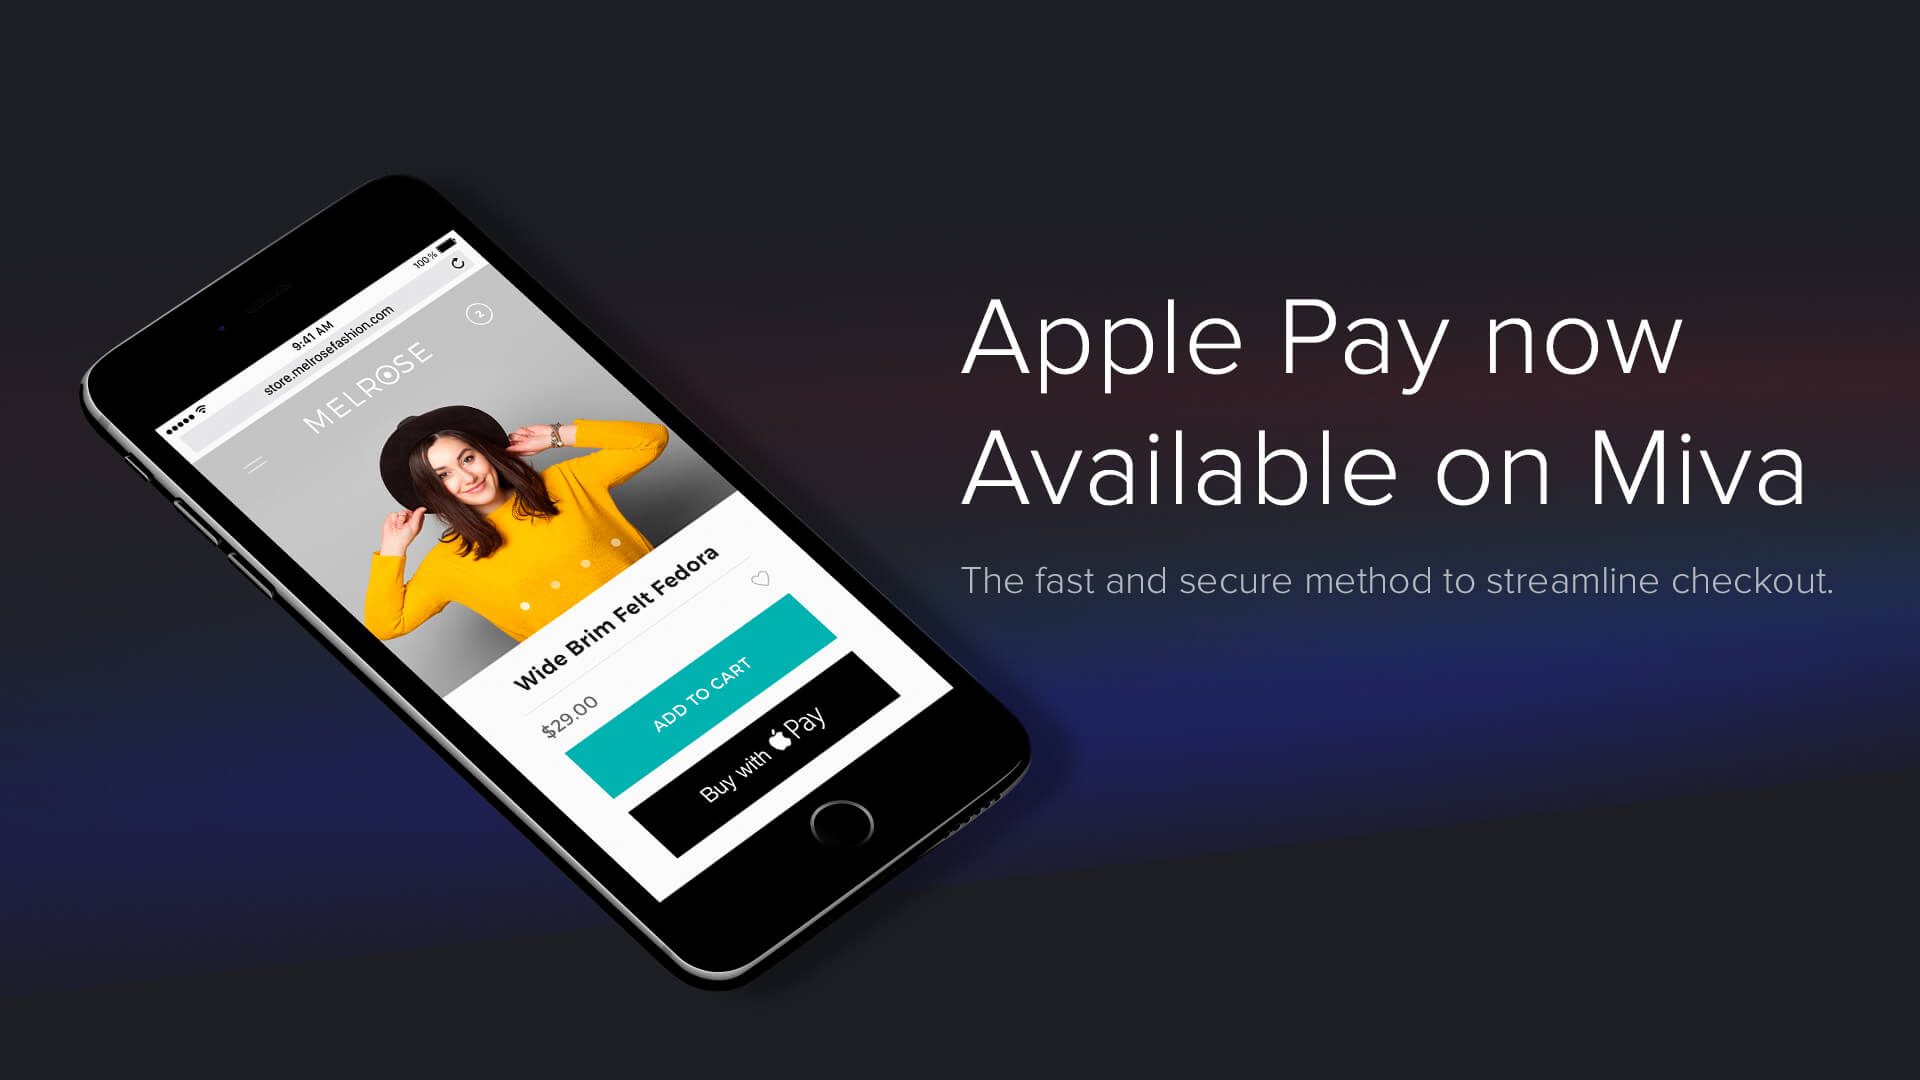 Apple Pay now Available on Miva